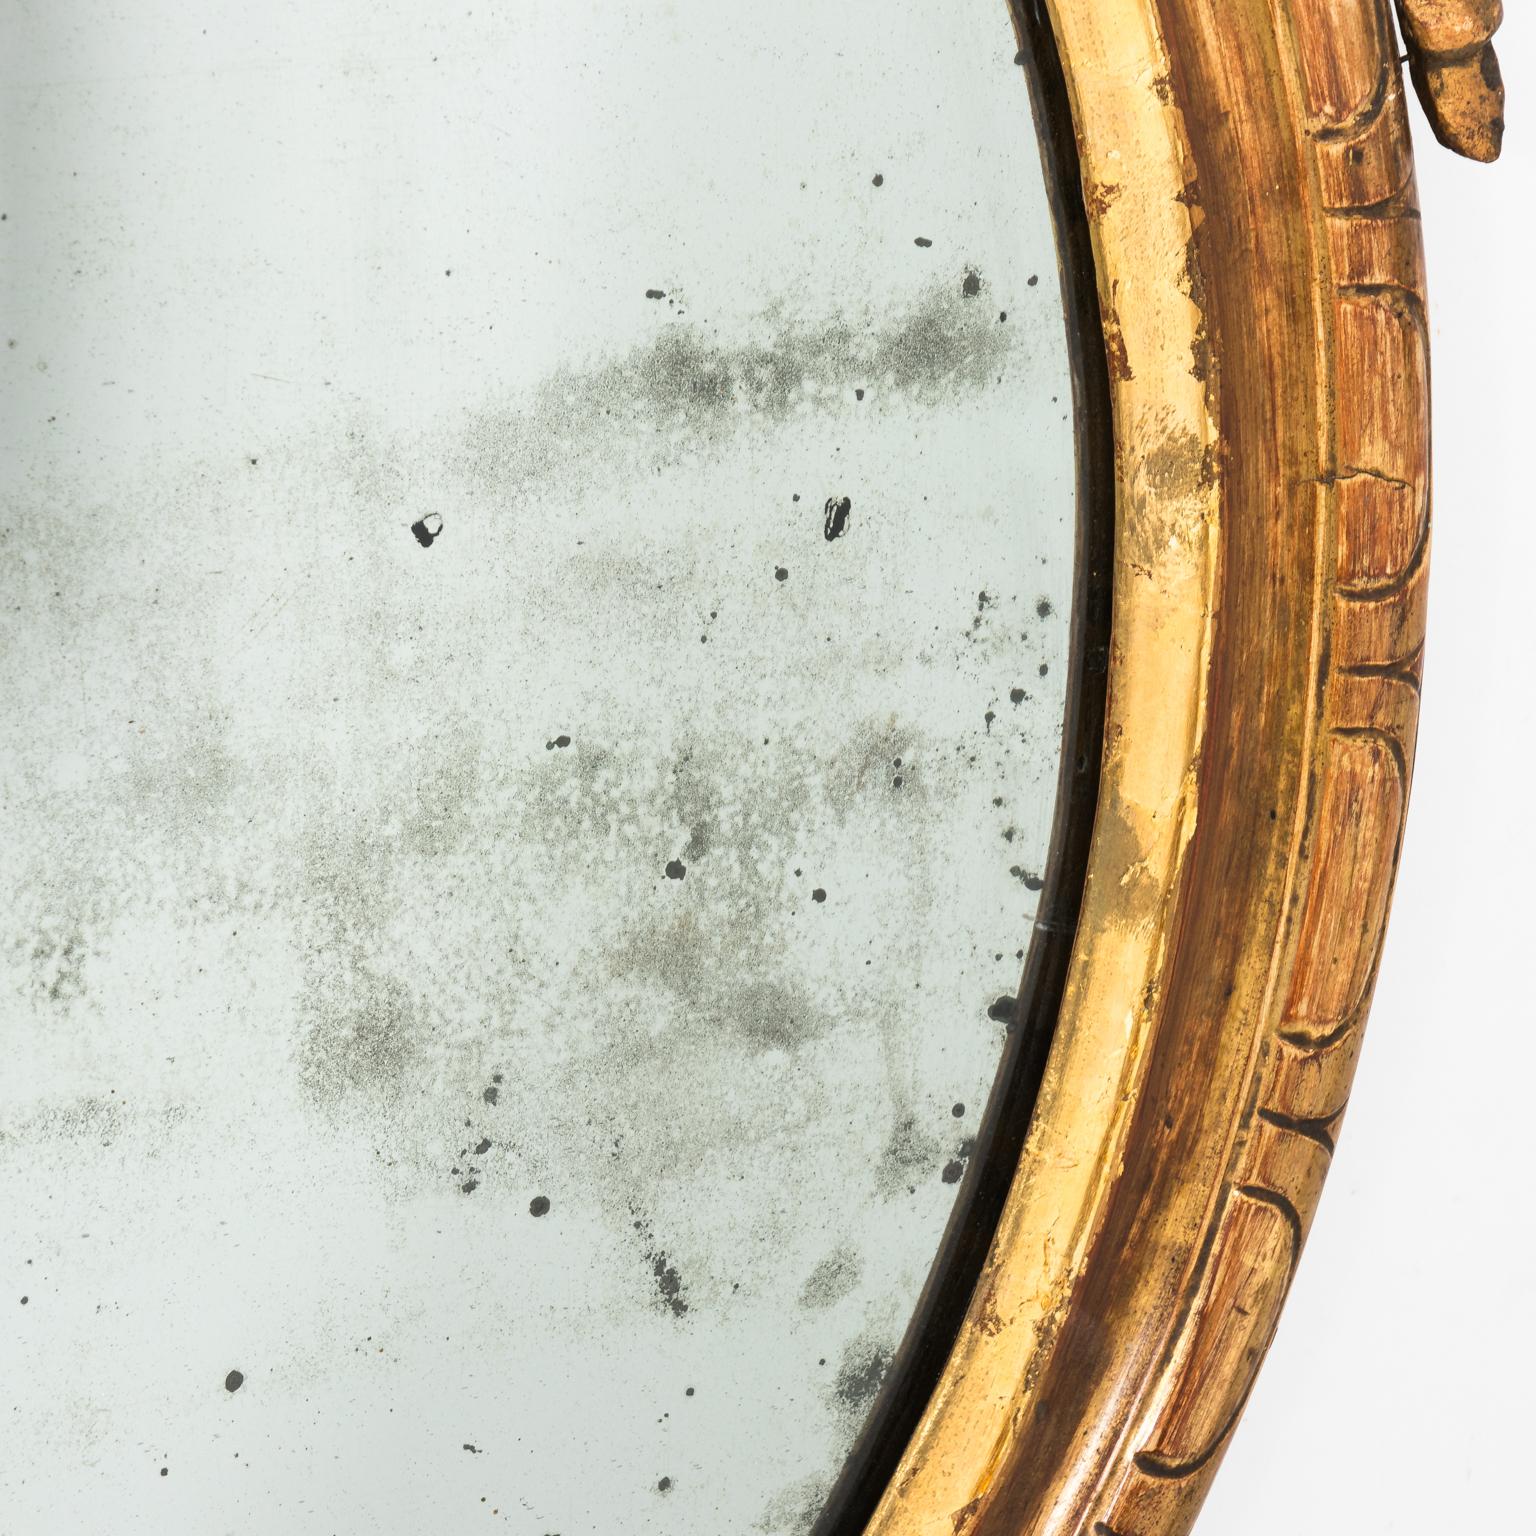 Oval Italian giltwood mirror with carved daffodil on the crown, circa 19th century. Please note the mirror features repair to the crown and chips to the giltwood, the original mirror plate also shows minor losses to silver layer.